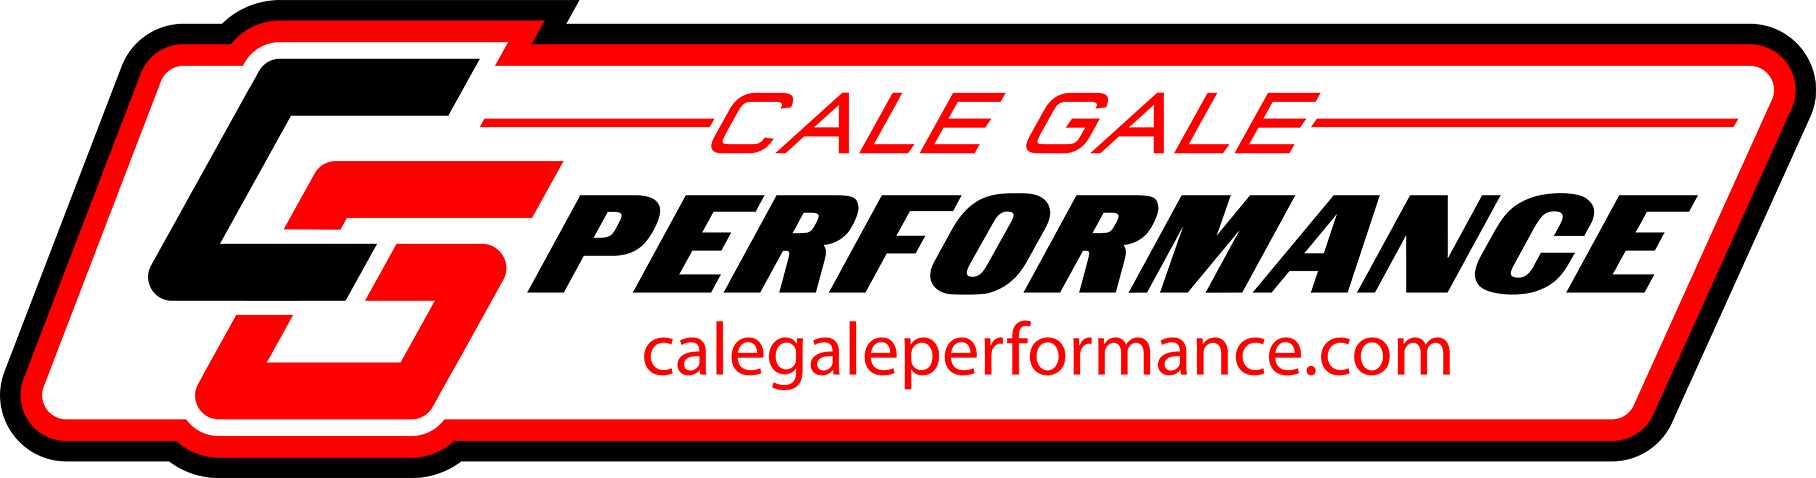 Cale Gale Performance